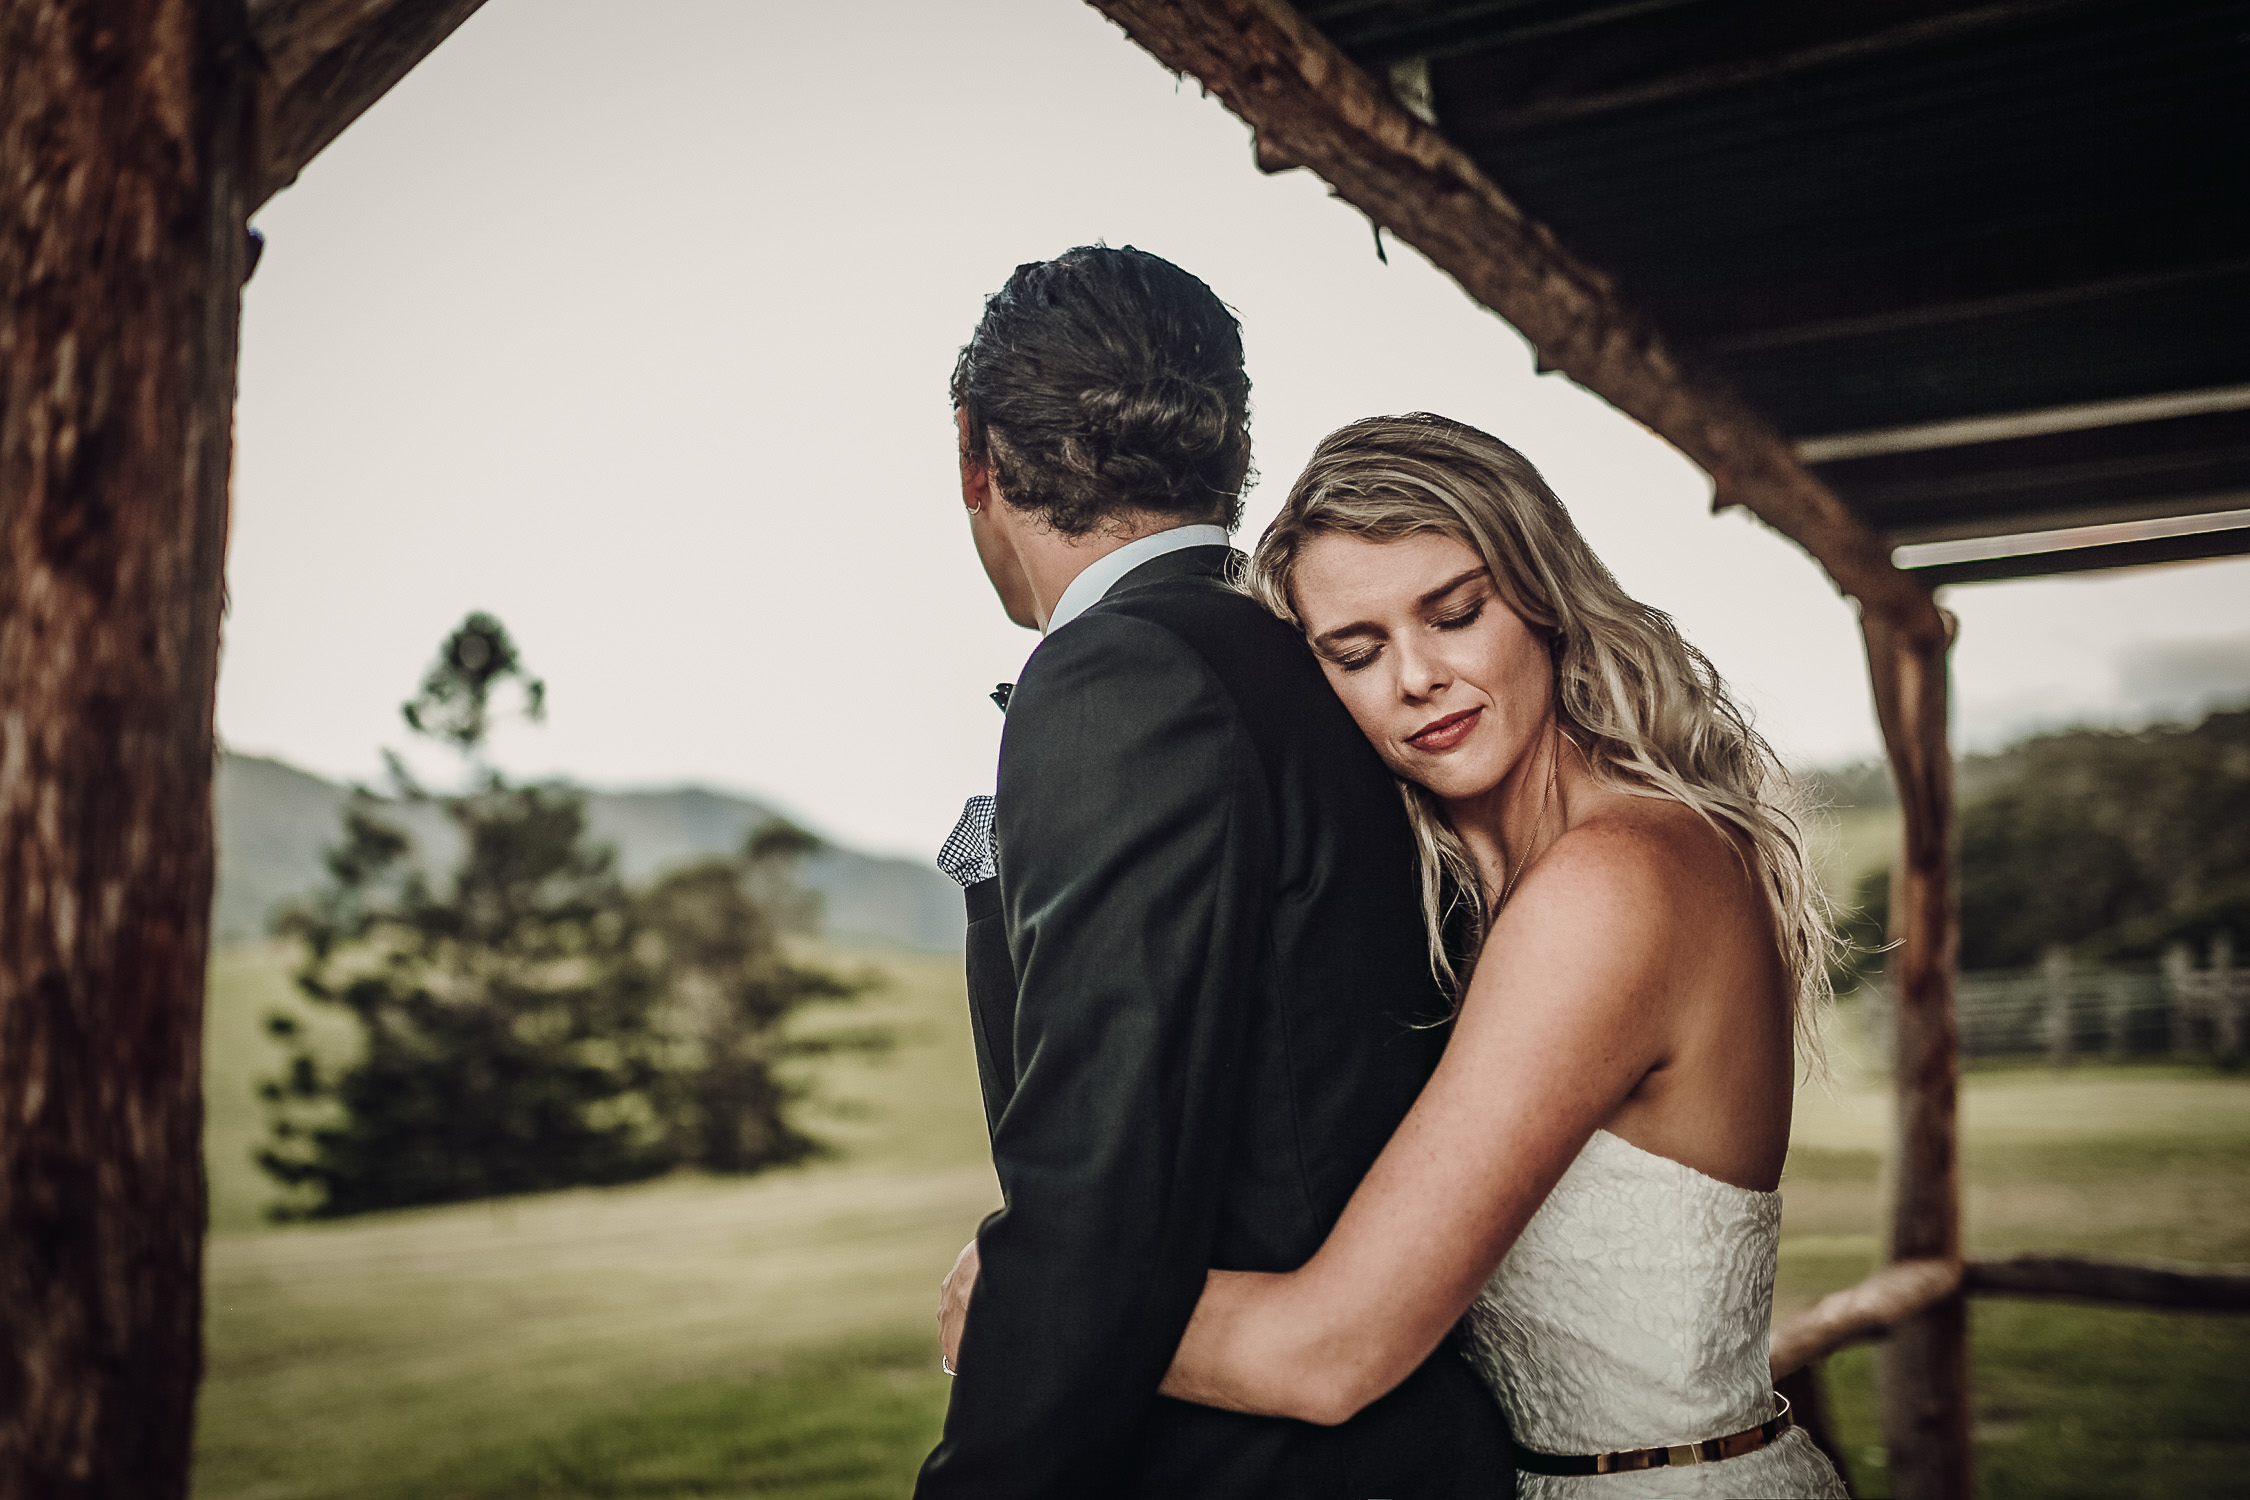 True-North-Photography-Cowbell-Creek-Gold-Coast-wedding-photographer-portrait-milking-shed-1.jpg